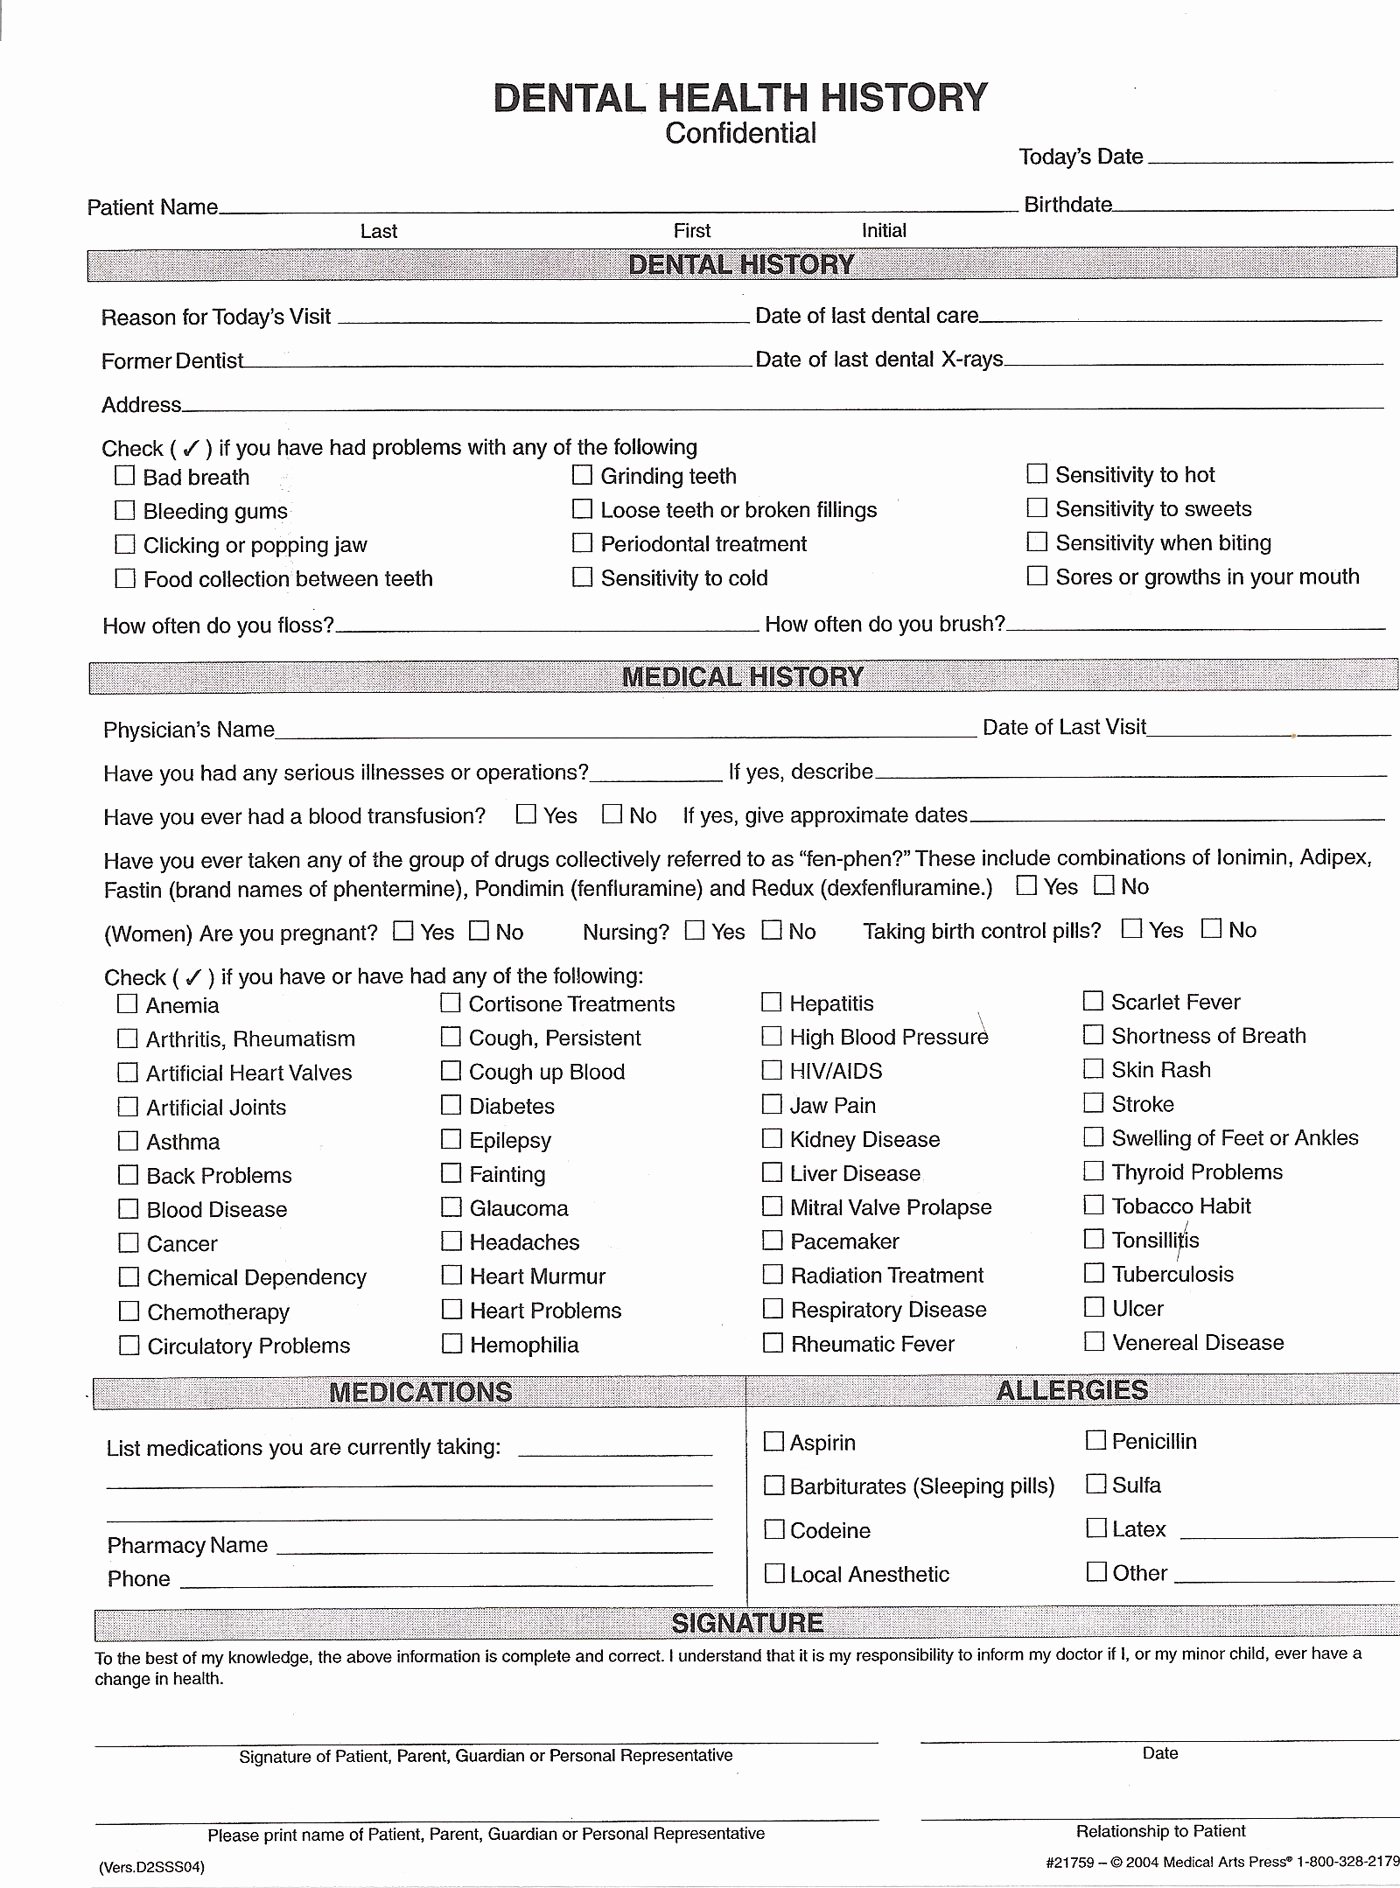 Dental Office forms Templates Inspirational Medical History forms